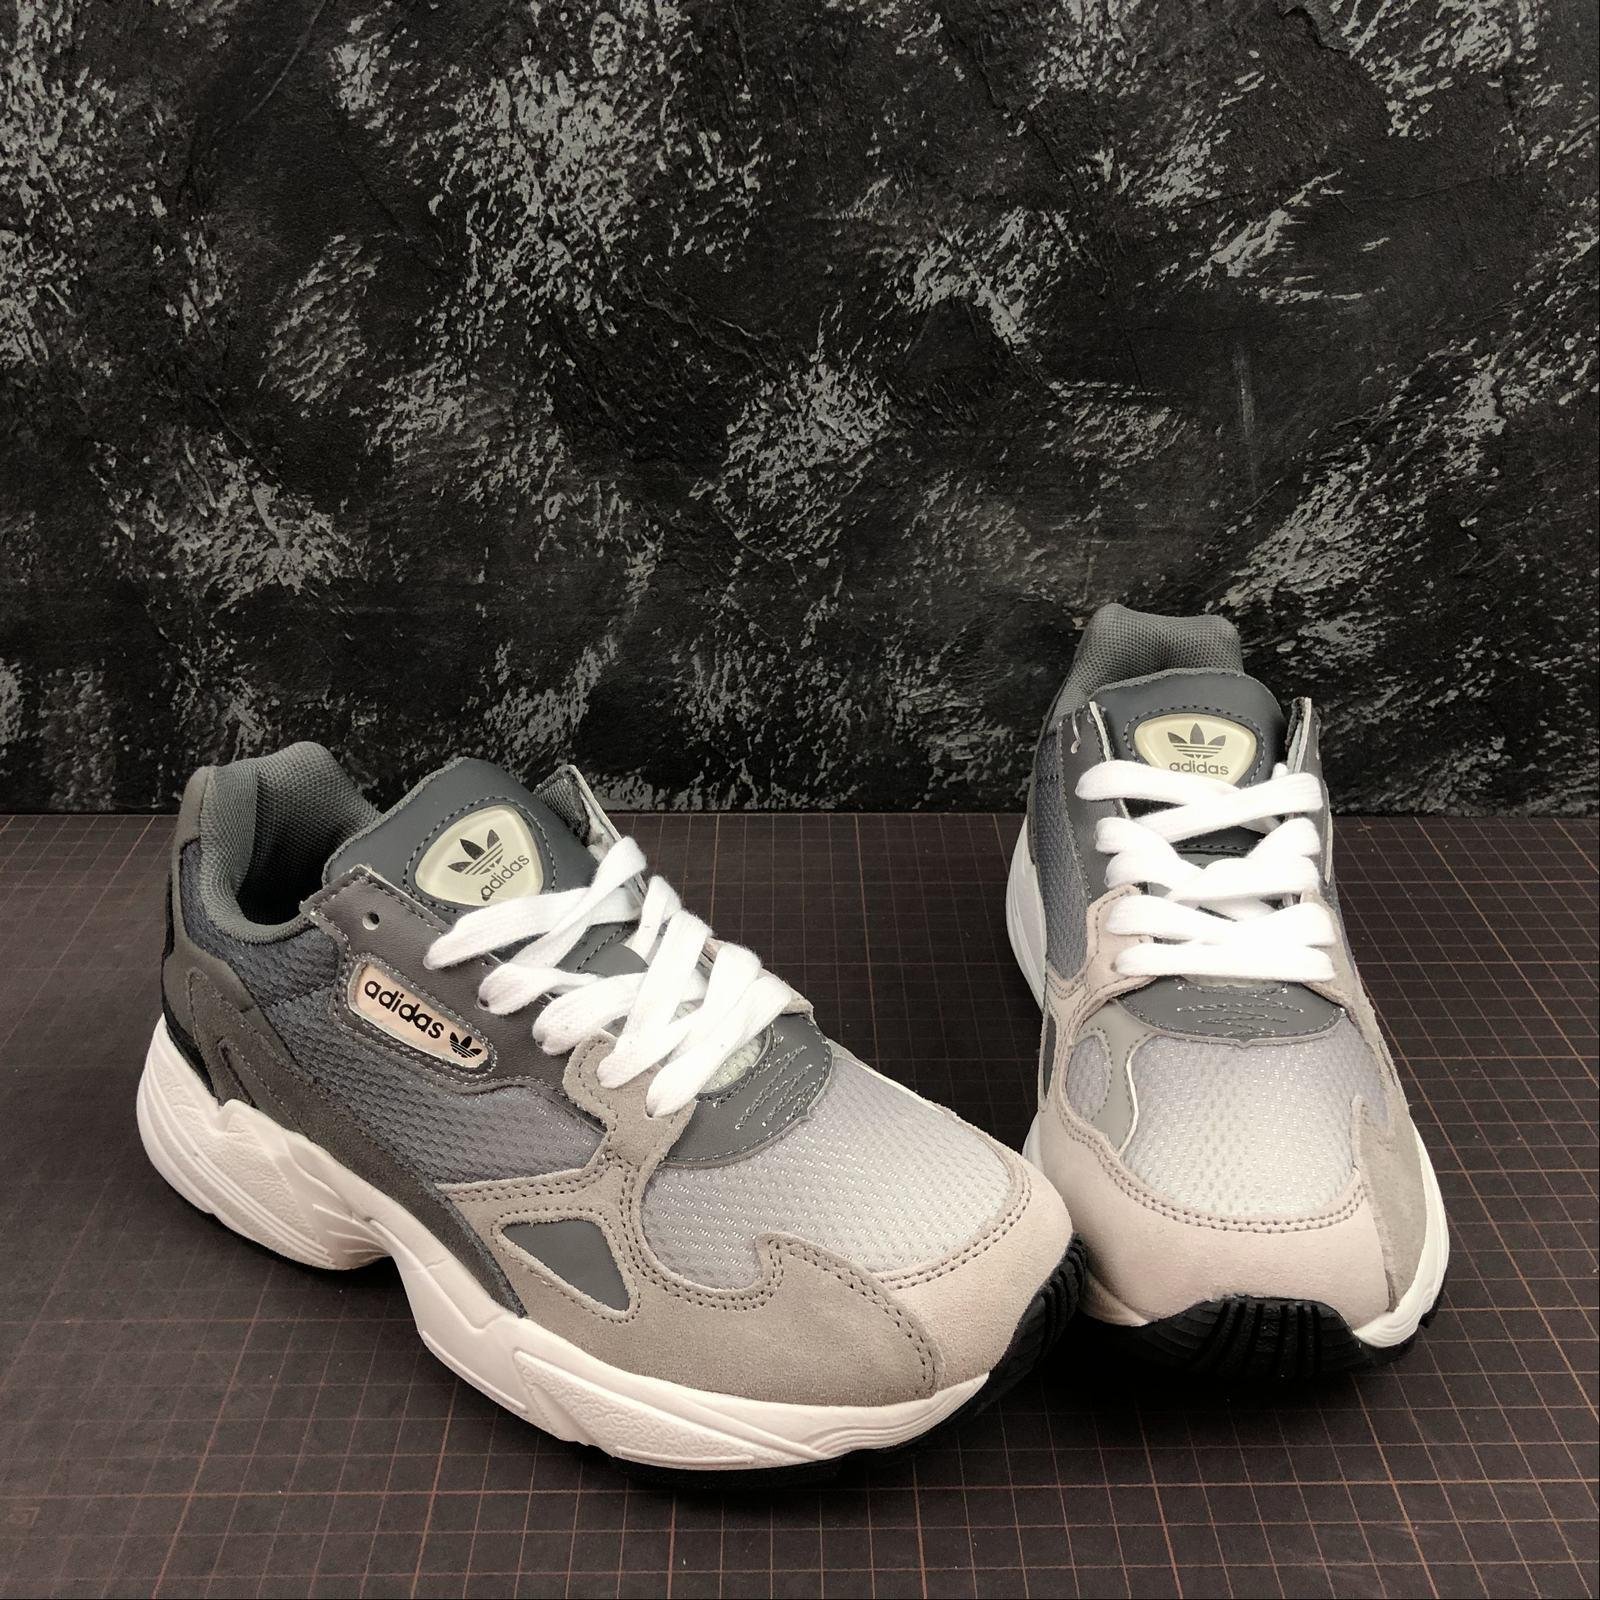 2019 New Falcon W cheap shoes top quality shoes sport shoes (China Trading  Company) - Athletic & Sports Shoes - Shoes Products - DIYTrade